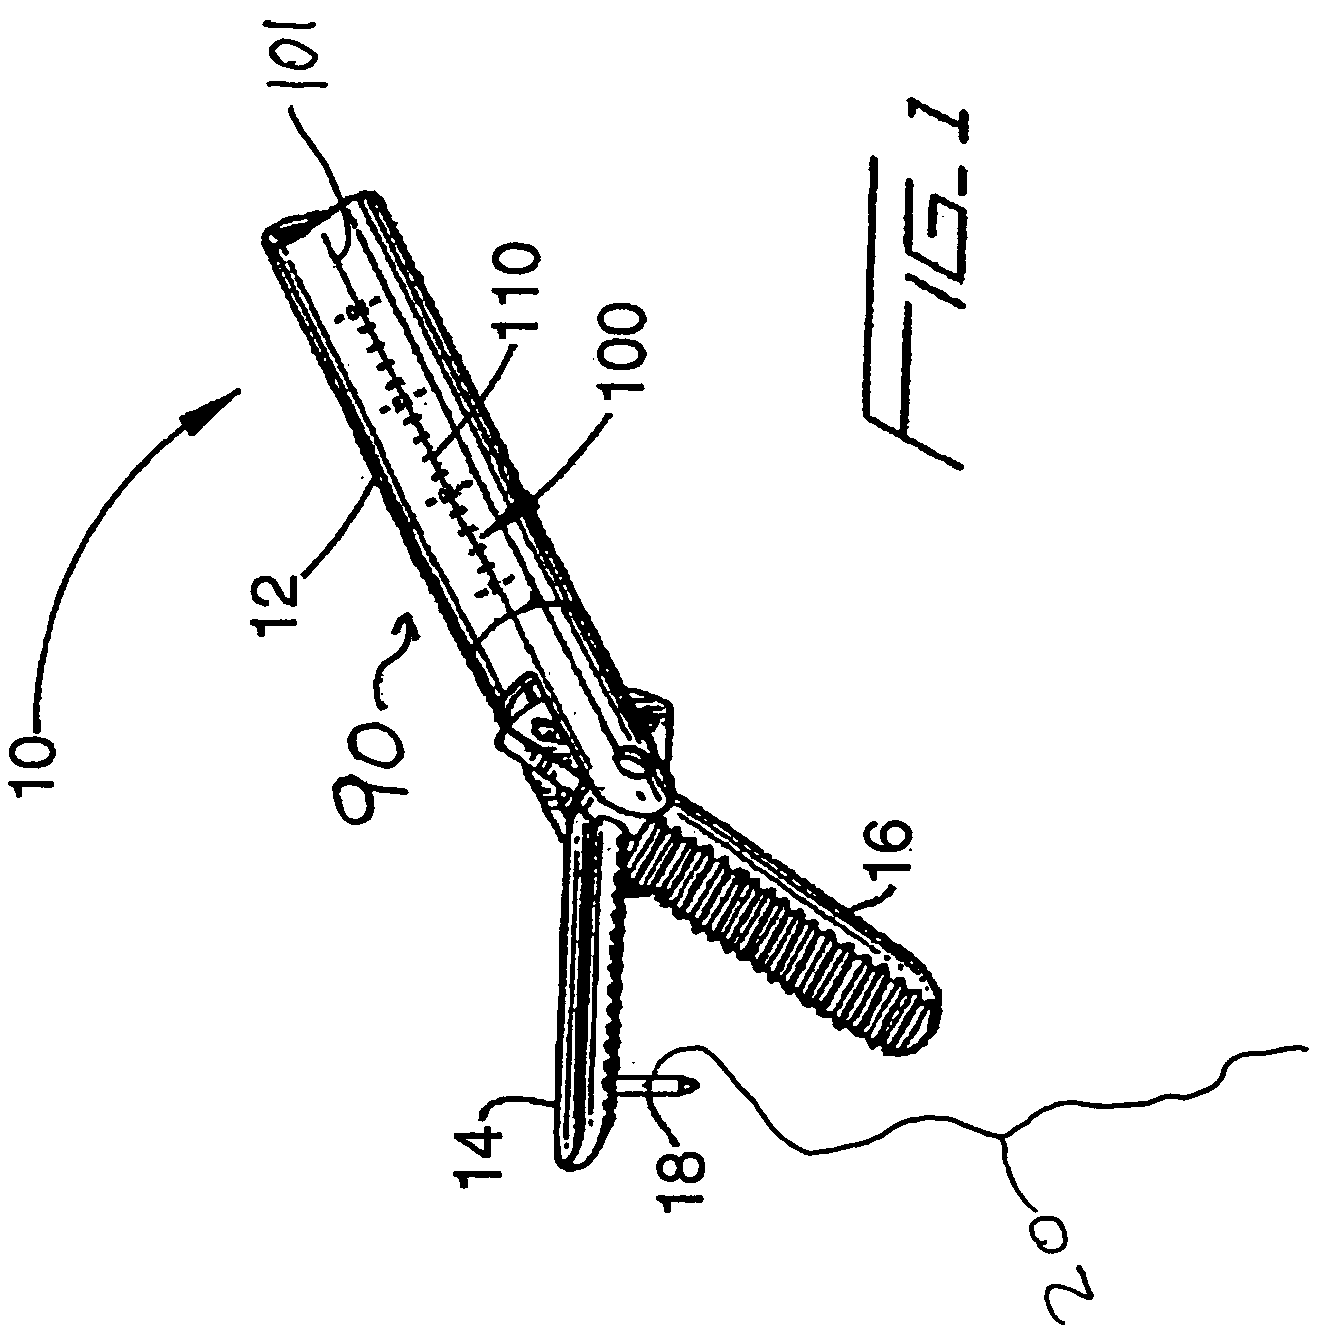 Surgical suturing apparatus with measurement structure